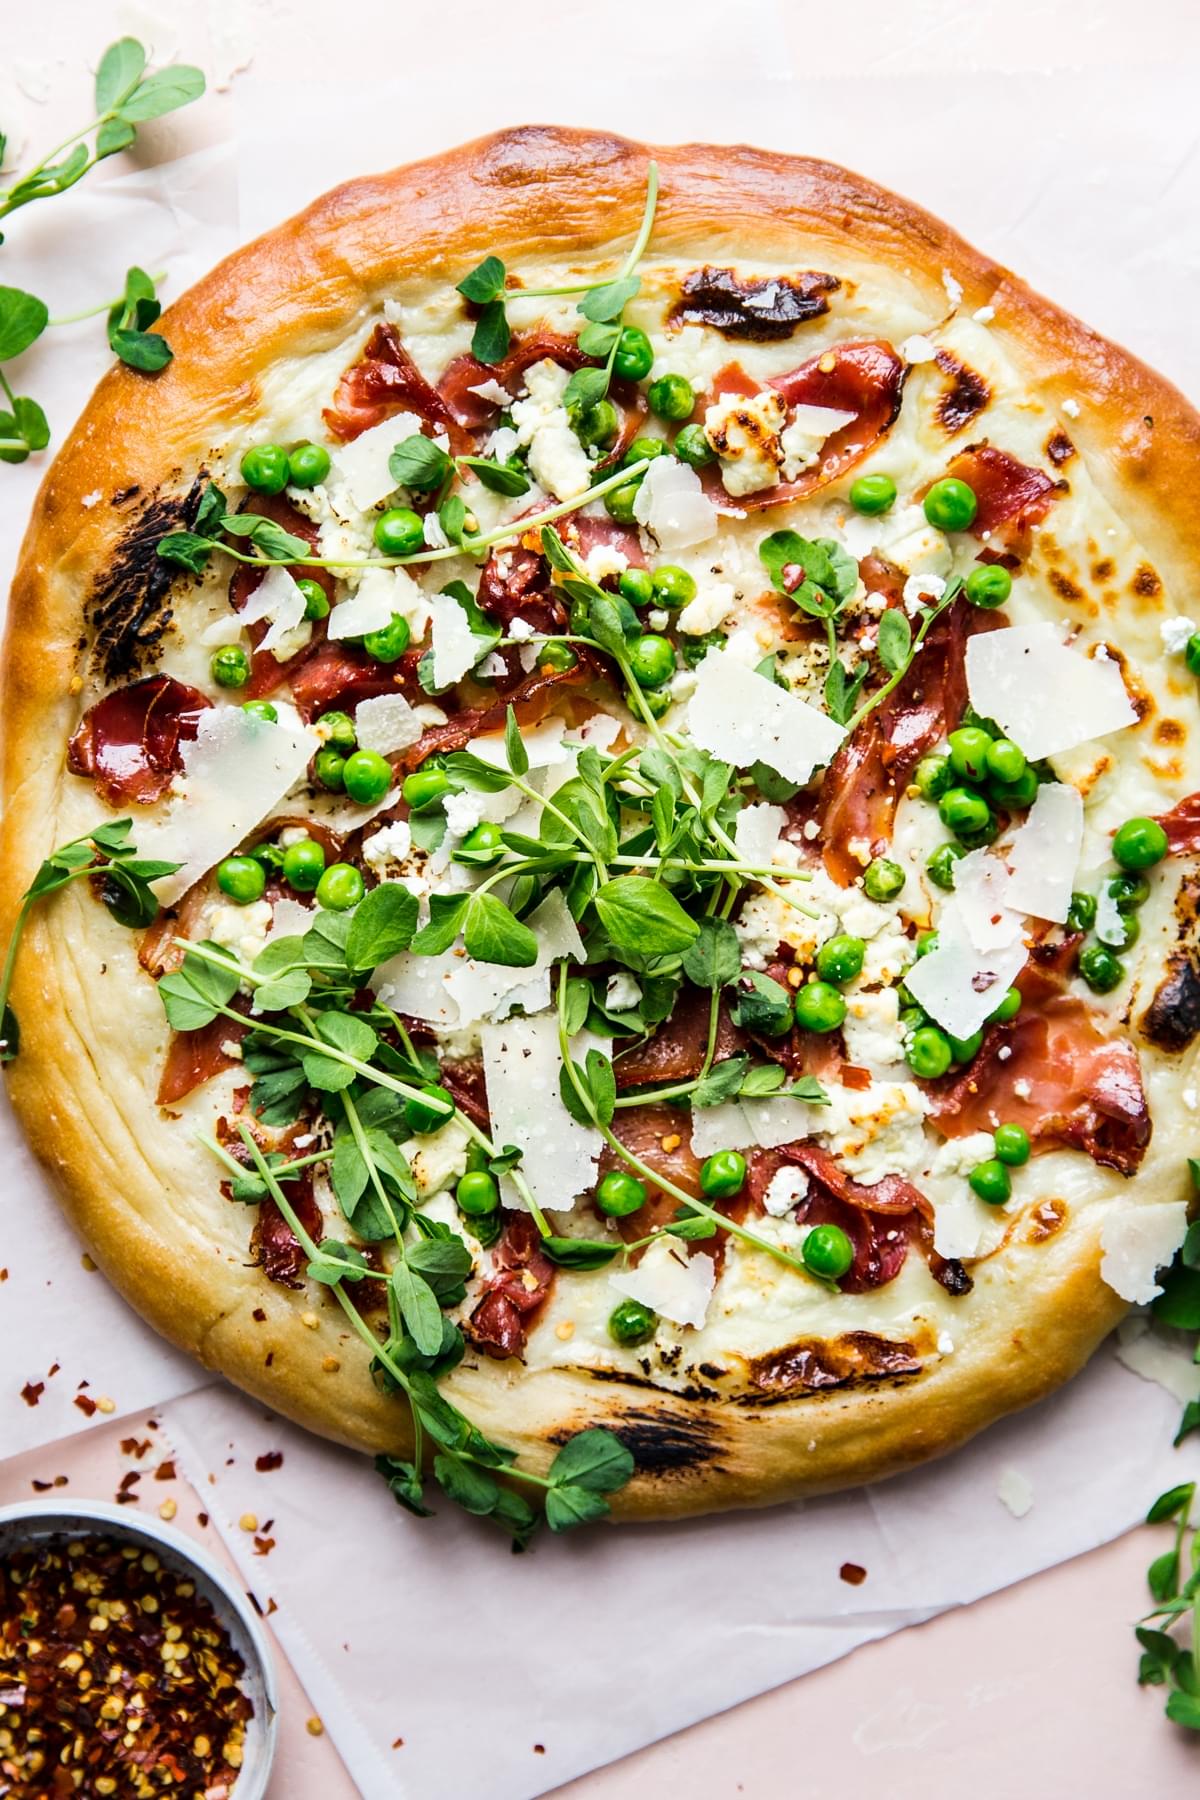 Pea and prosciutto pizza with goat cheese cream sauce parmesan cheese spring pizza with micro greens and pepper flakes